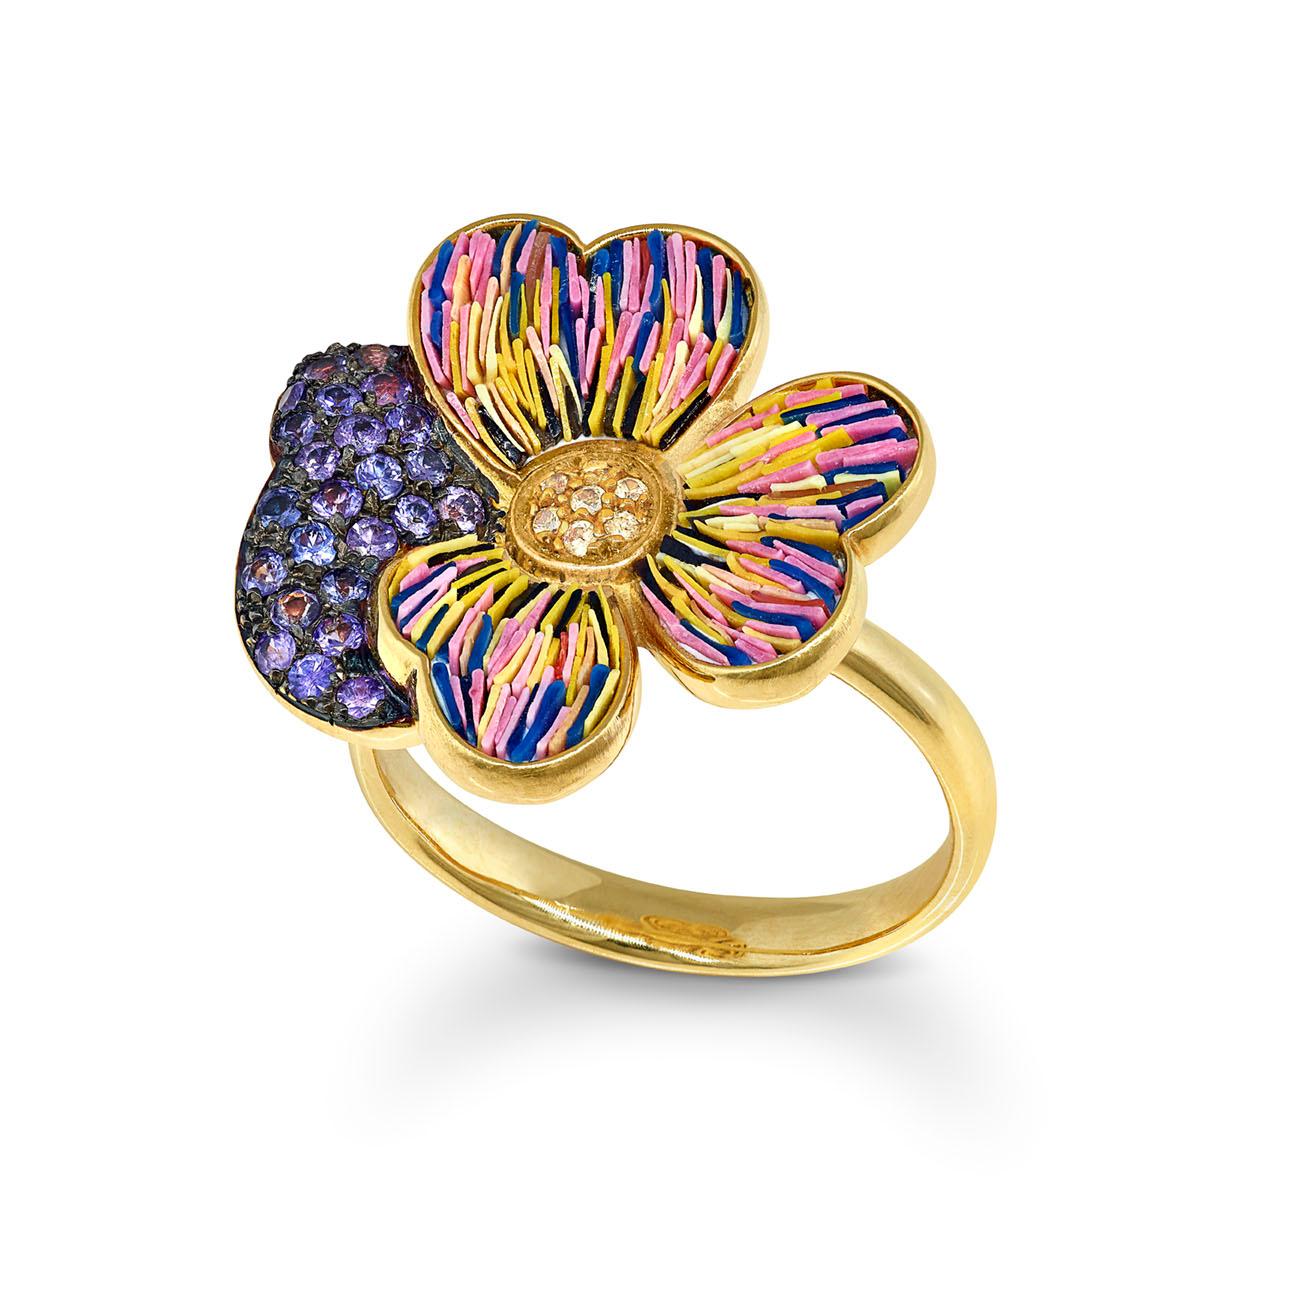 Brilliant Cut Stylish Ring Yellow Gold Yellow and Pink Sapphires Handdecorated with NanoMosaic For Sale